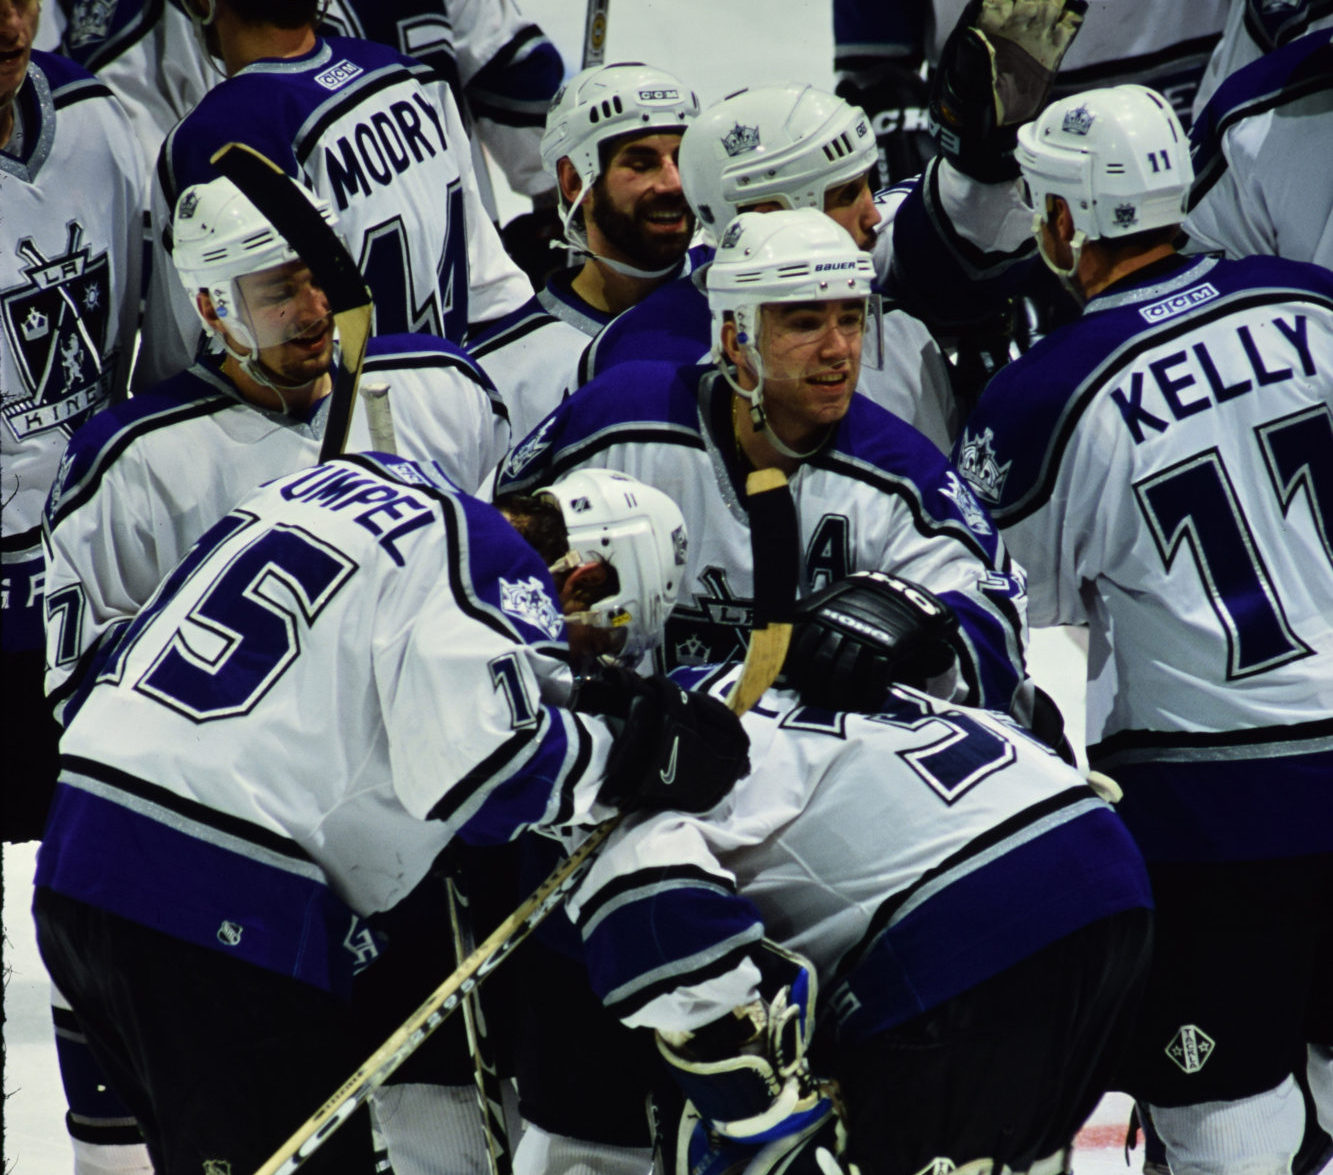 May 6 playoff memories; SHL title for a steadying Moverare; vintage 2001 pics